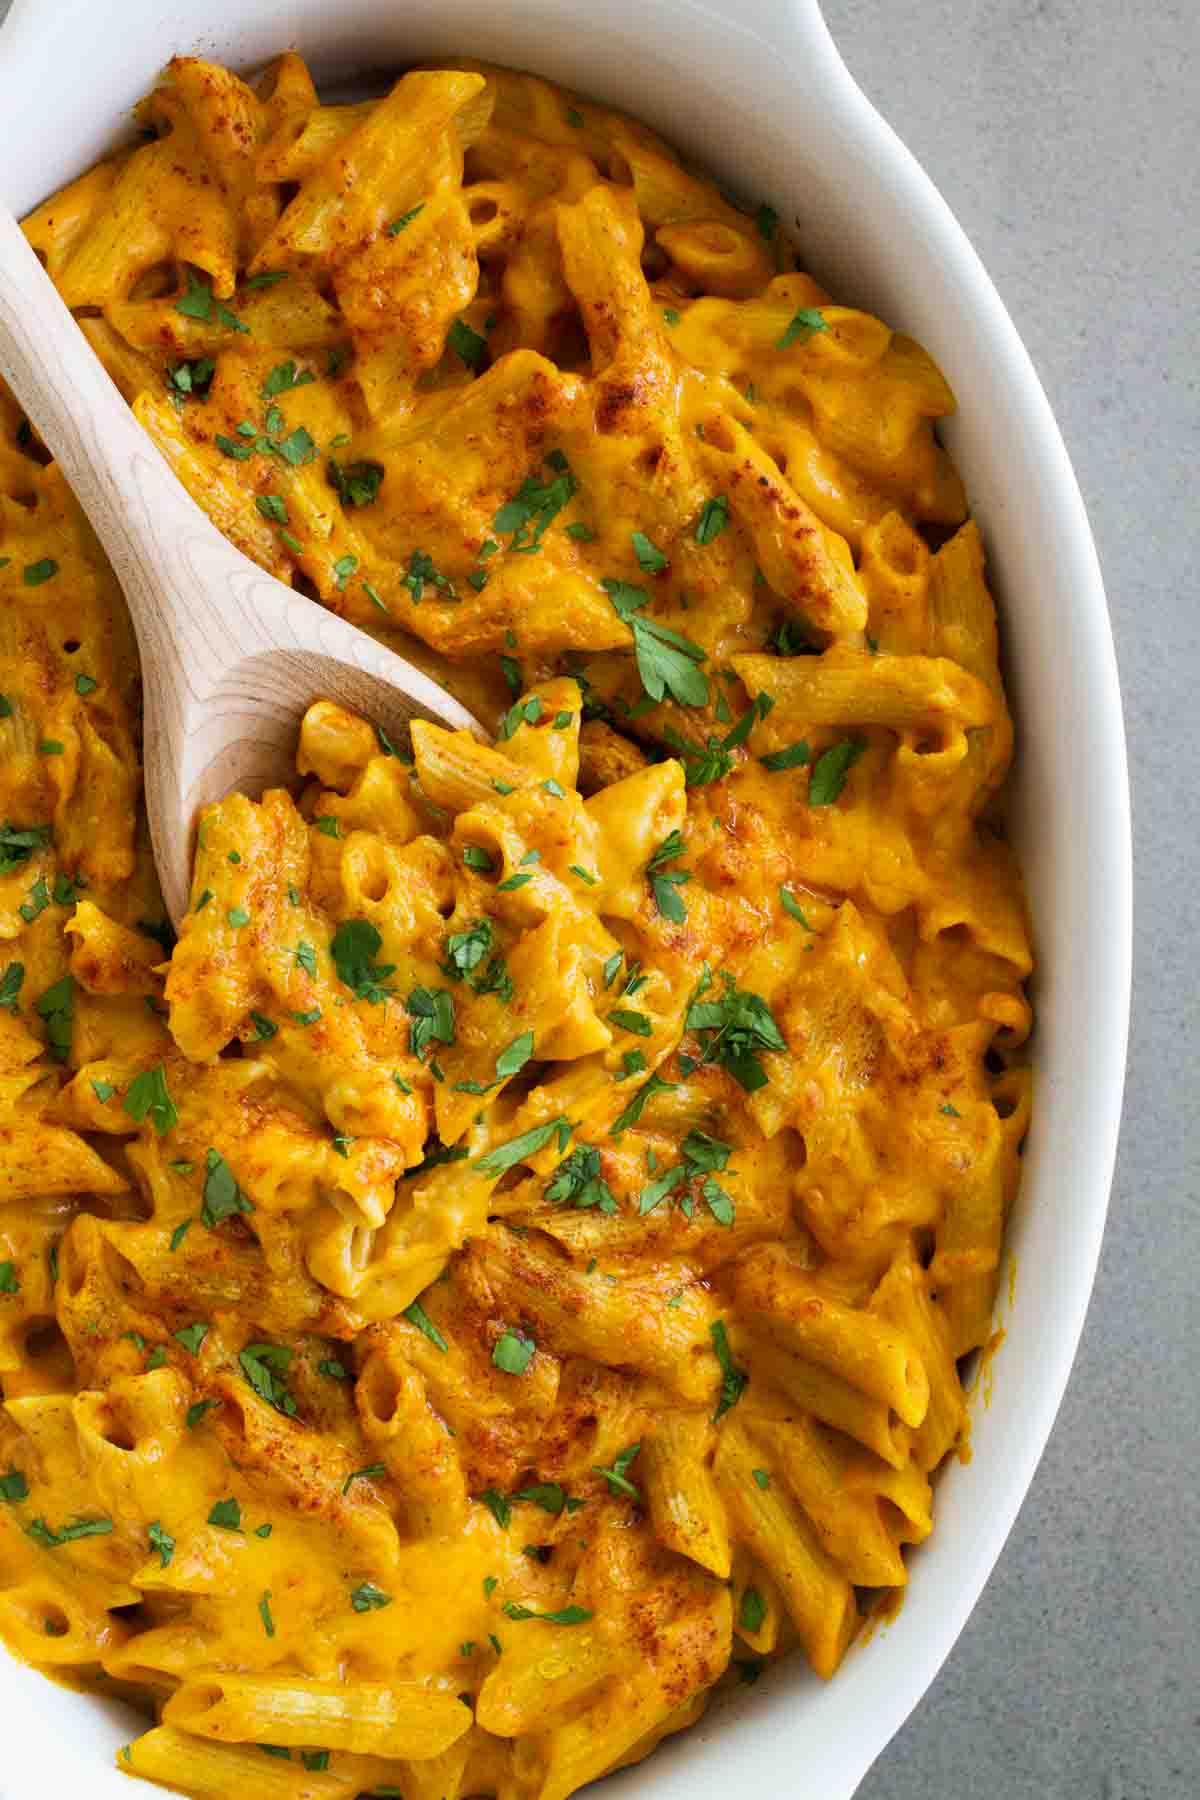 Mac and cheese made with pumpkin and cheddar topped with parsley.